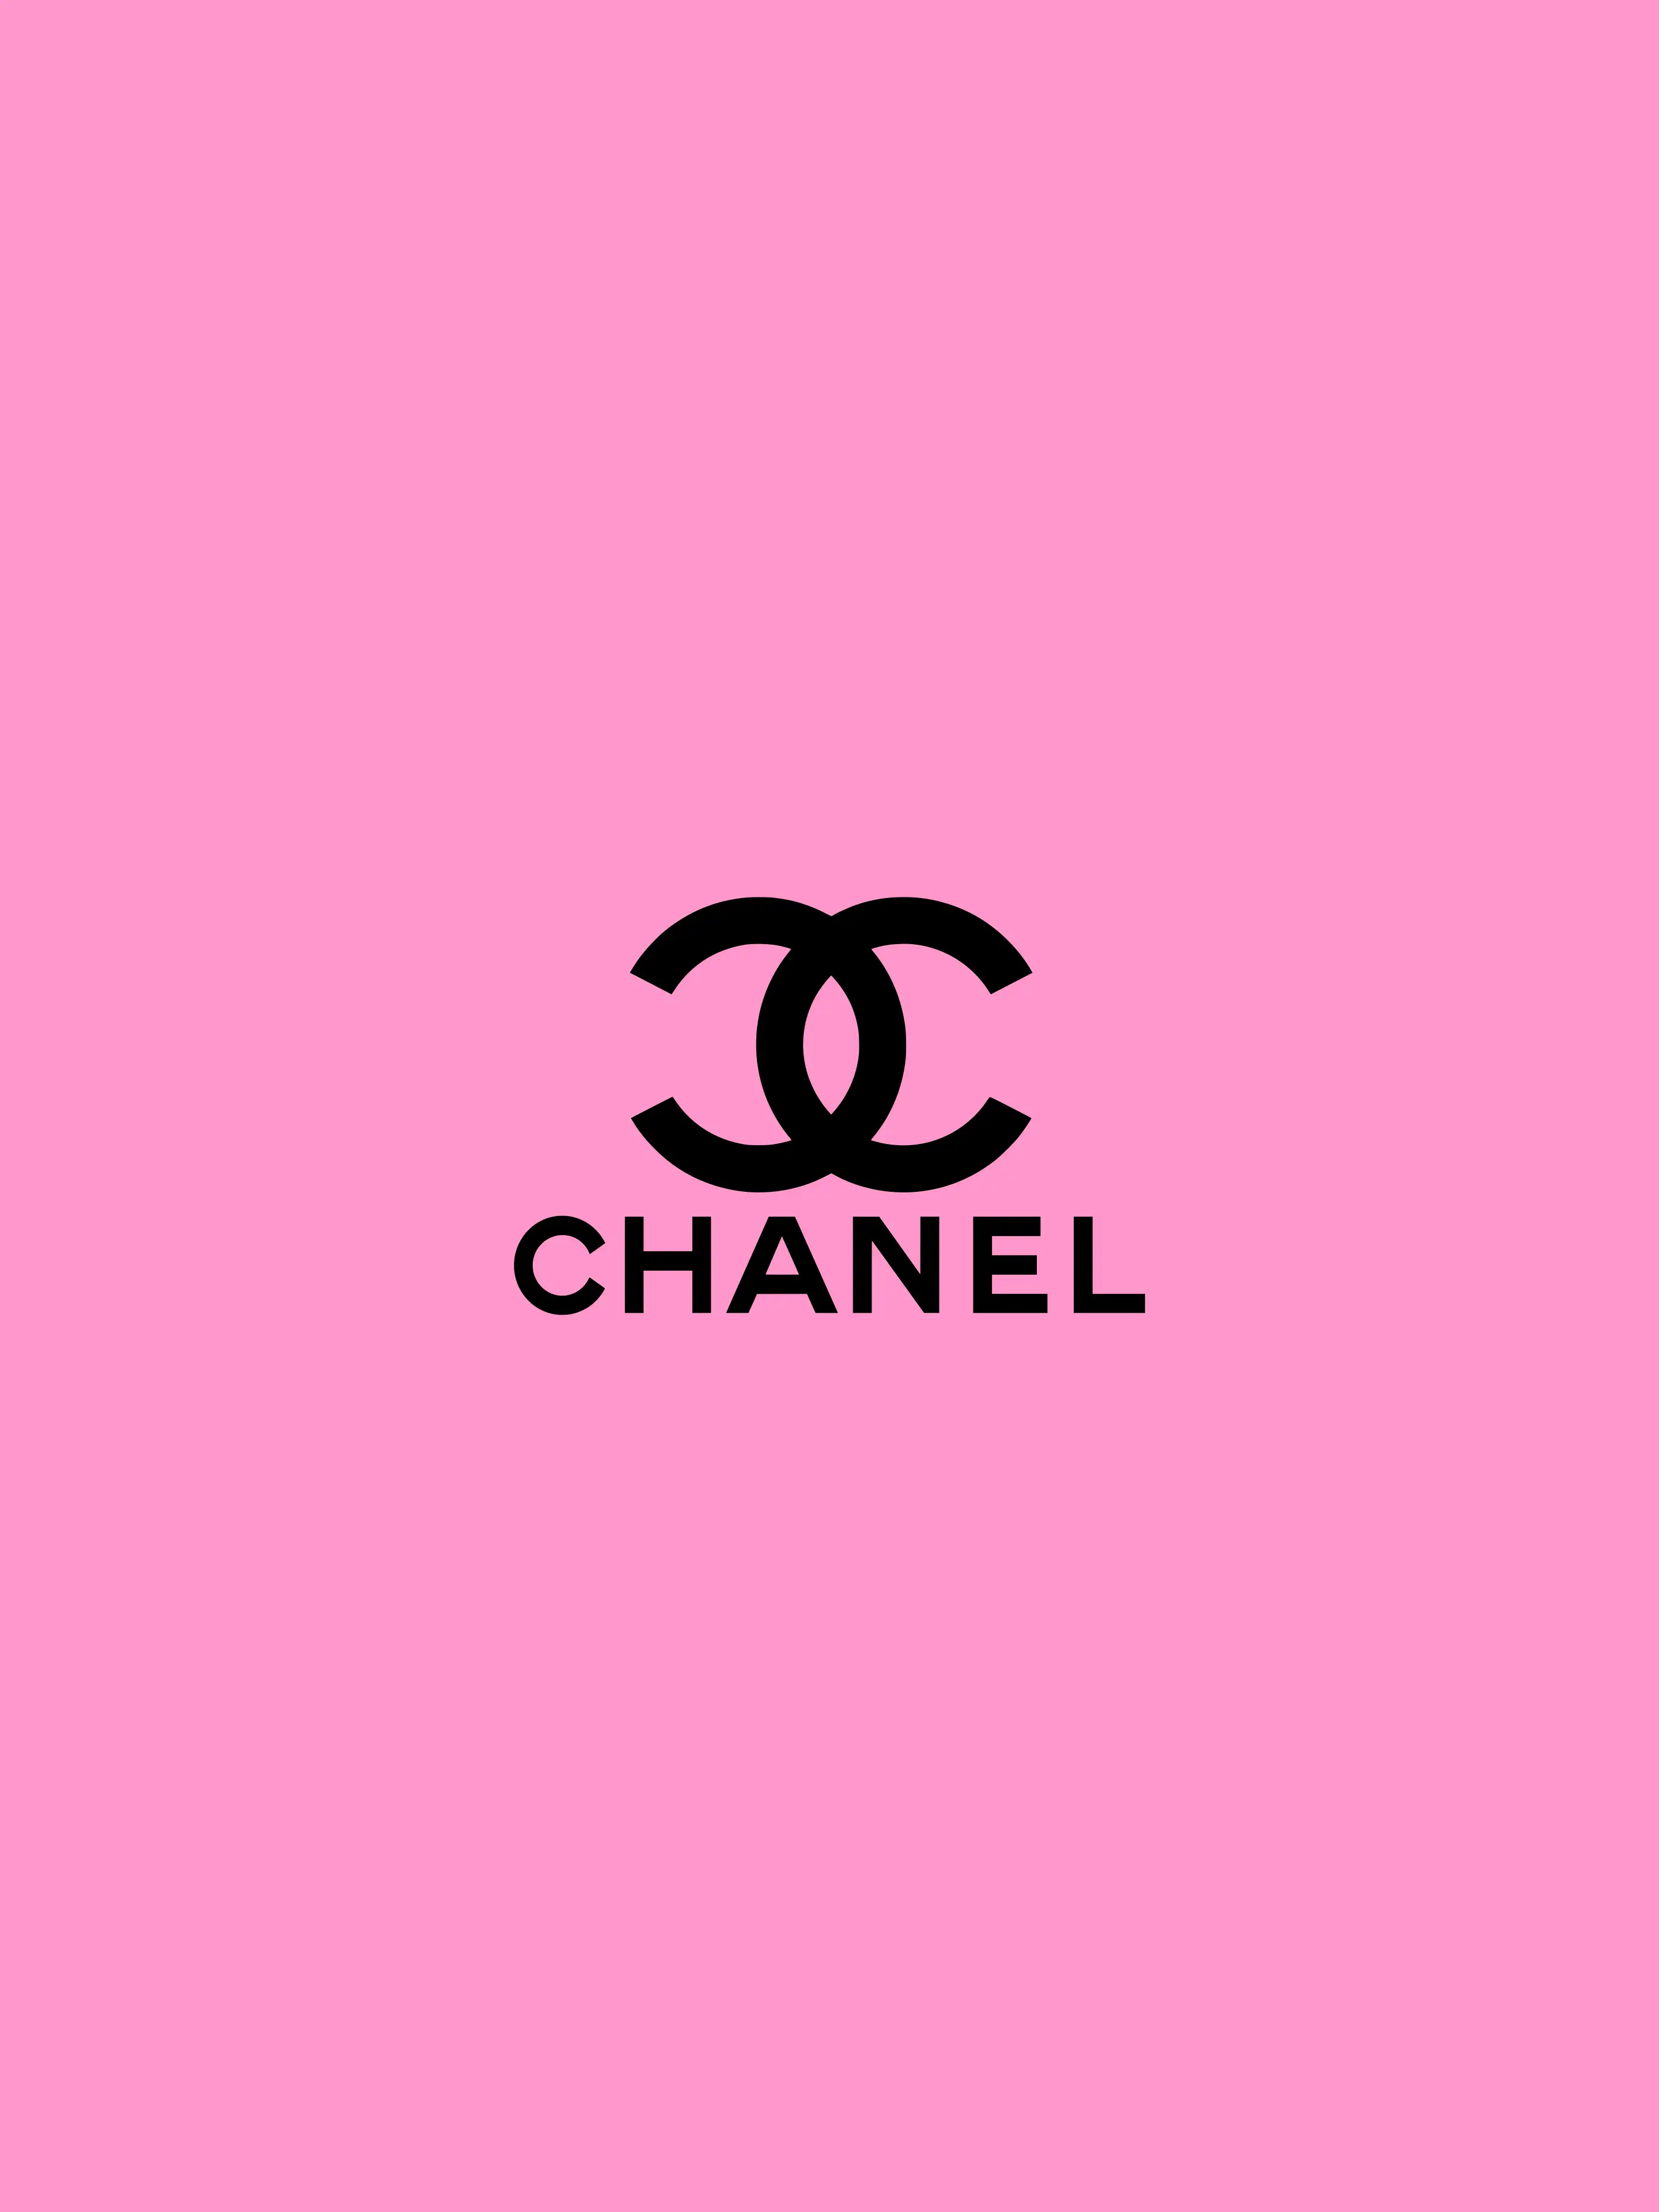 Chanel Backgrounds